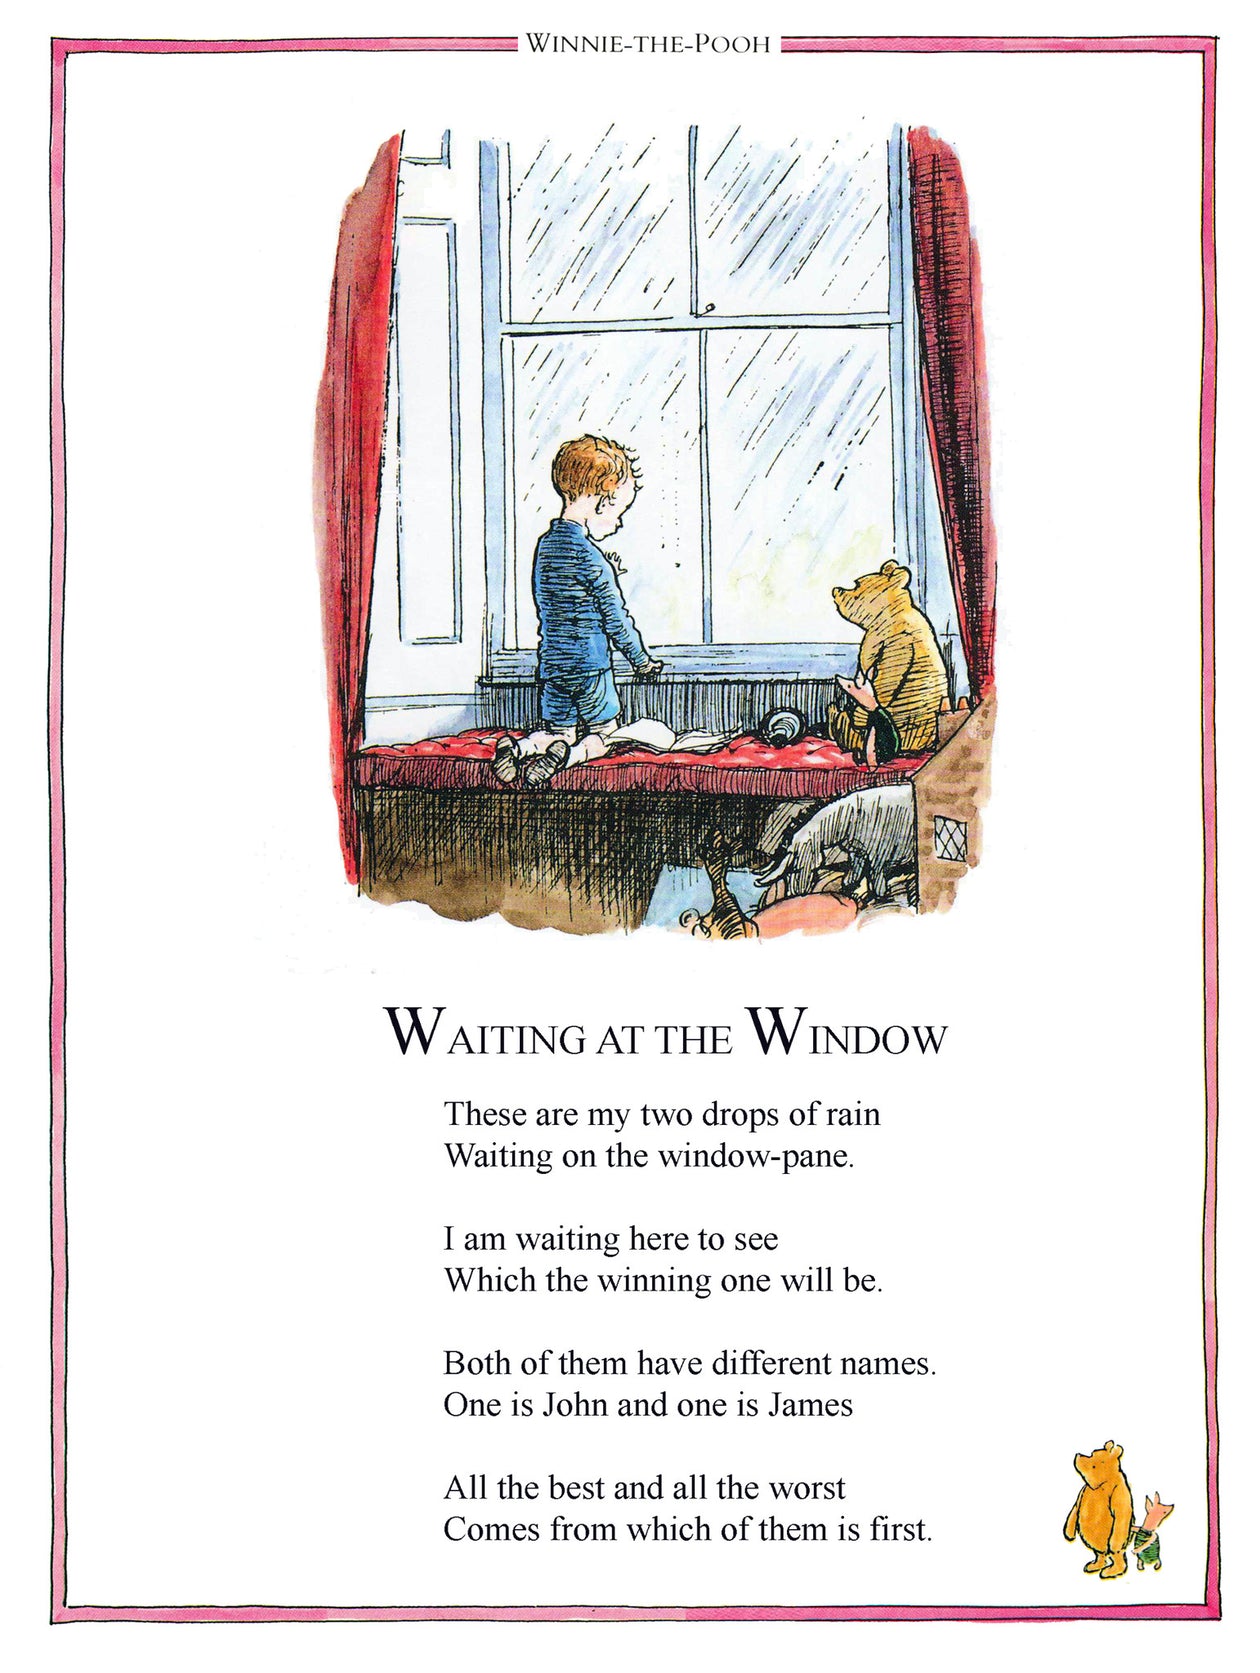 Waiting at the Window Winnie the Pooh